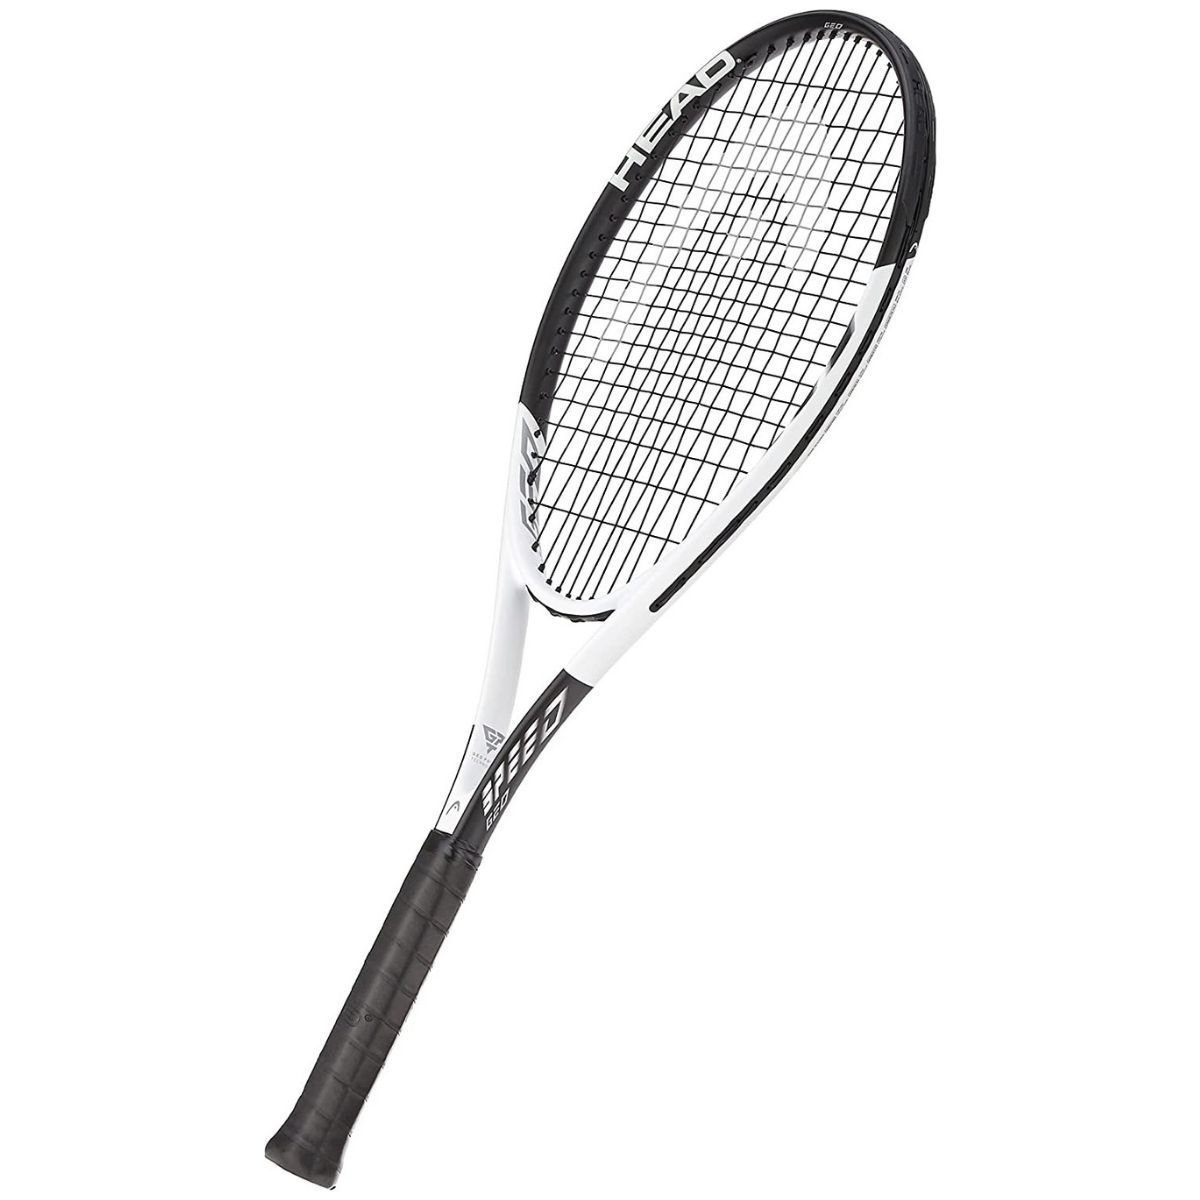 10 Best Tennis Rackets for All Types of Skill Levels